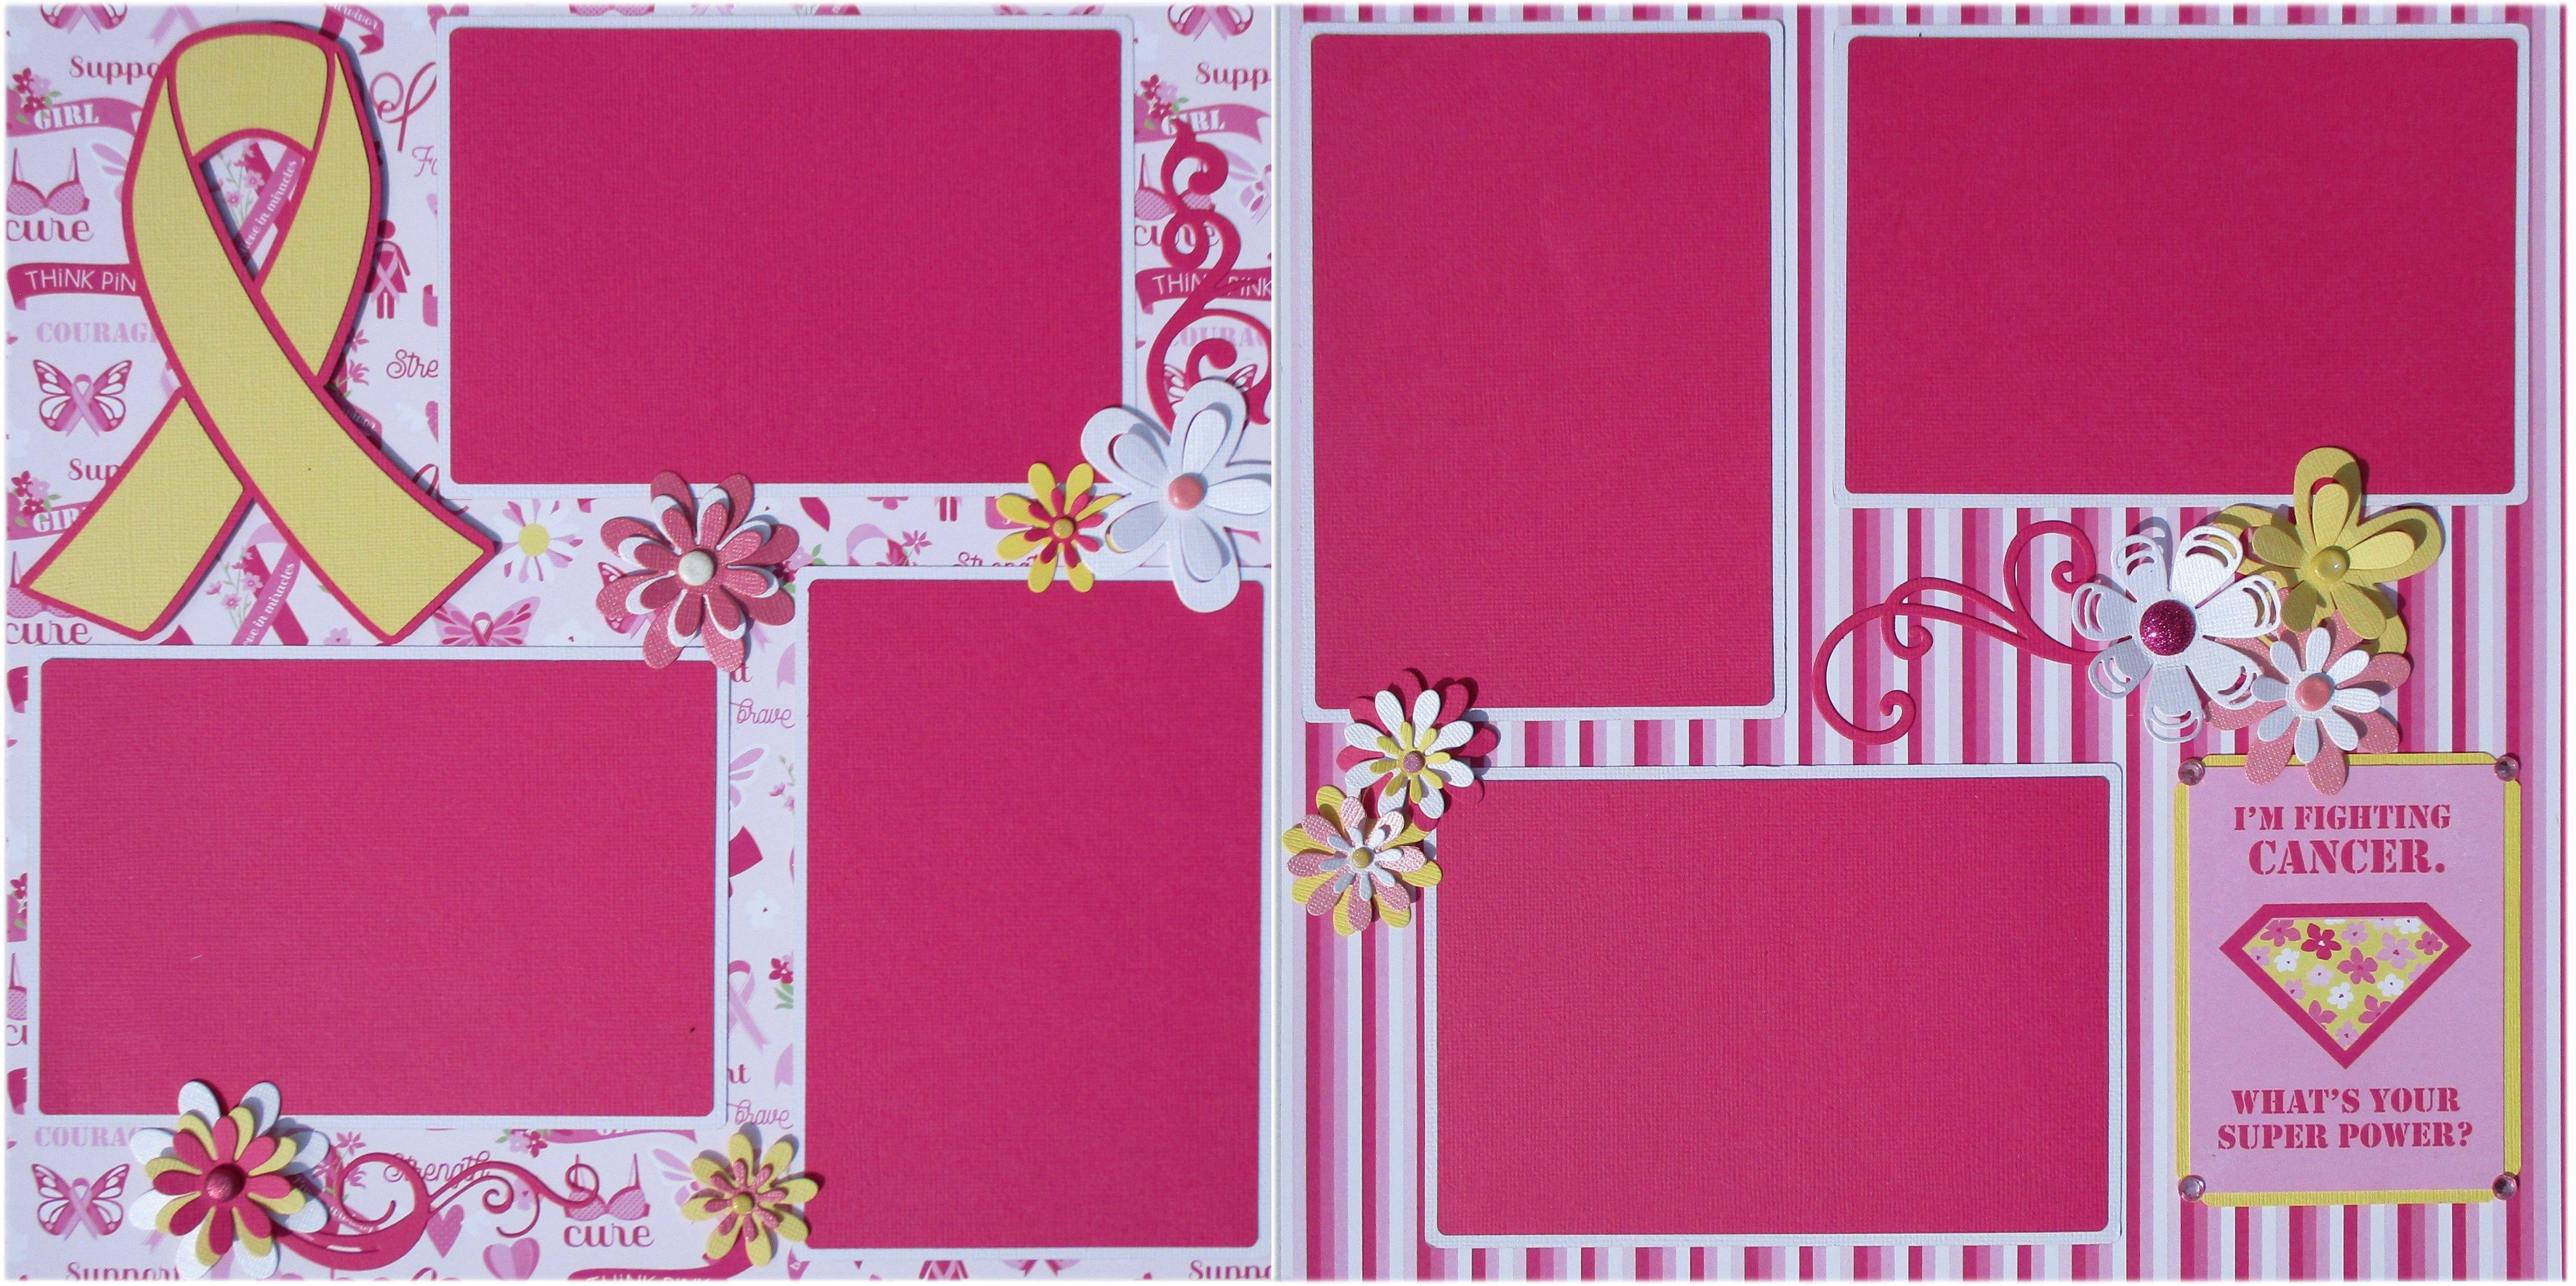 Operation: Save 2nd Base Breast Cancer Awareness 2- 12 x 12 Page Fully-Assembled & Hand-Embellished 3D Scrapbook Premades by SSC Designs